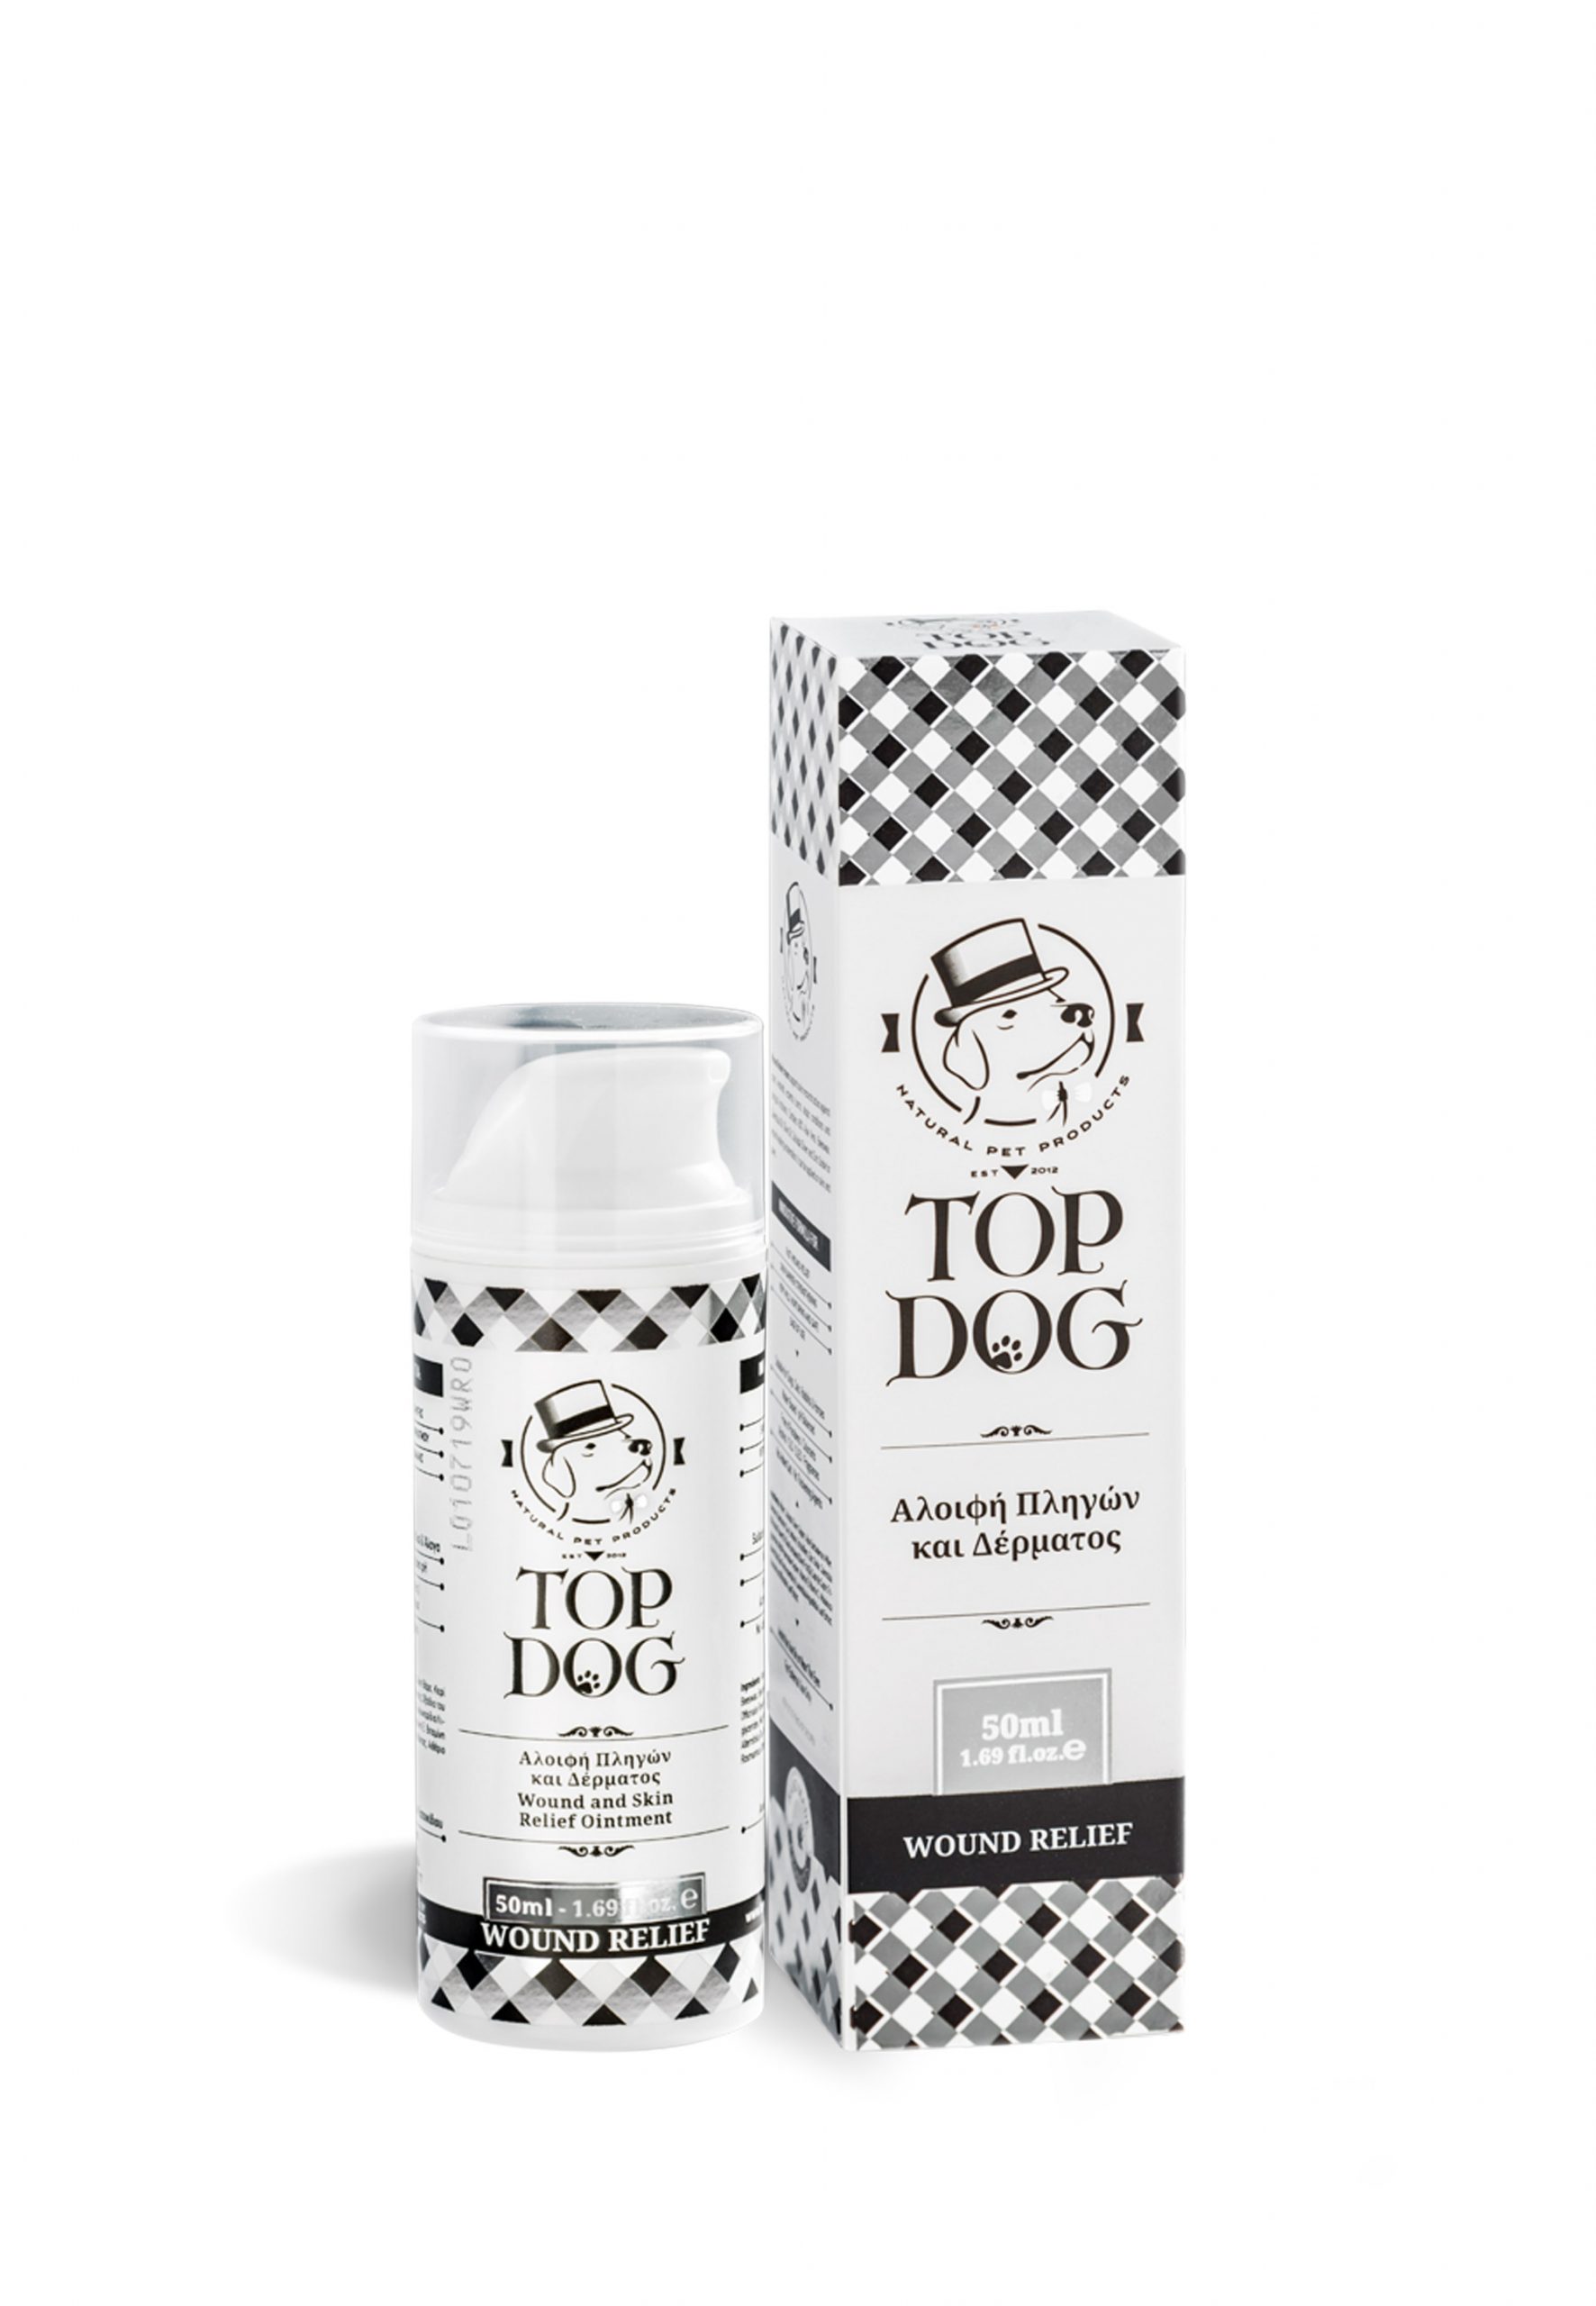 Top Dog Wound Relief 50ml